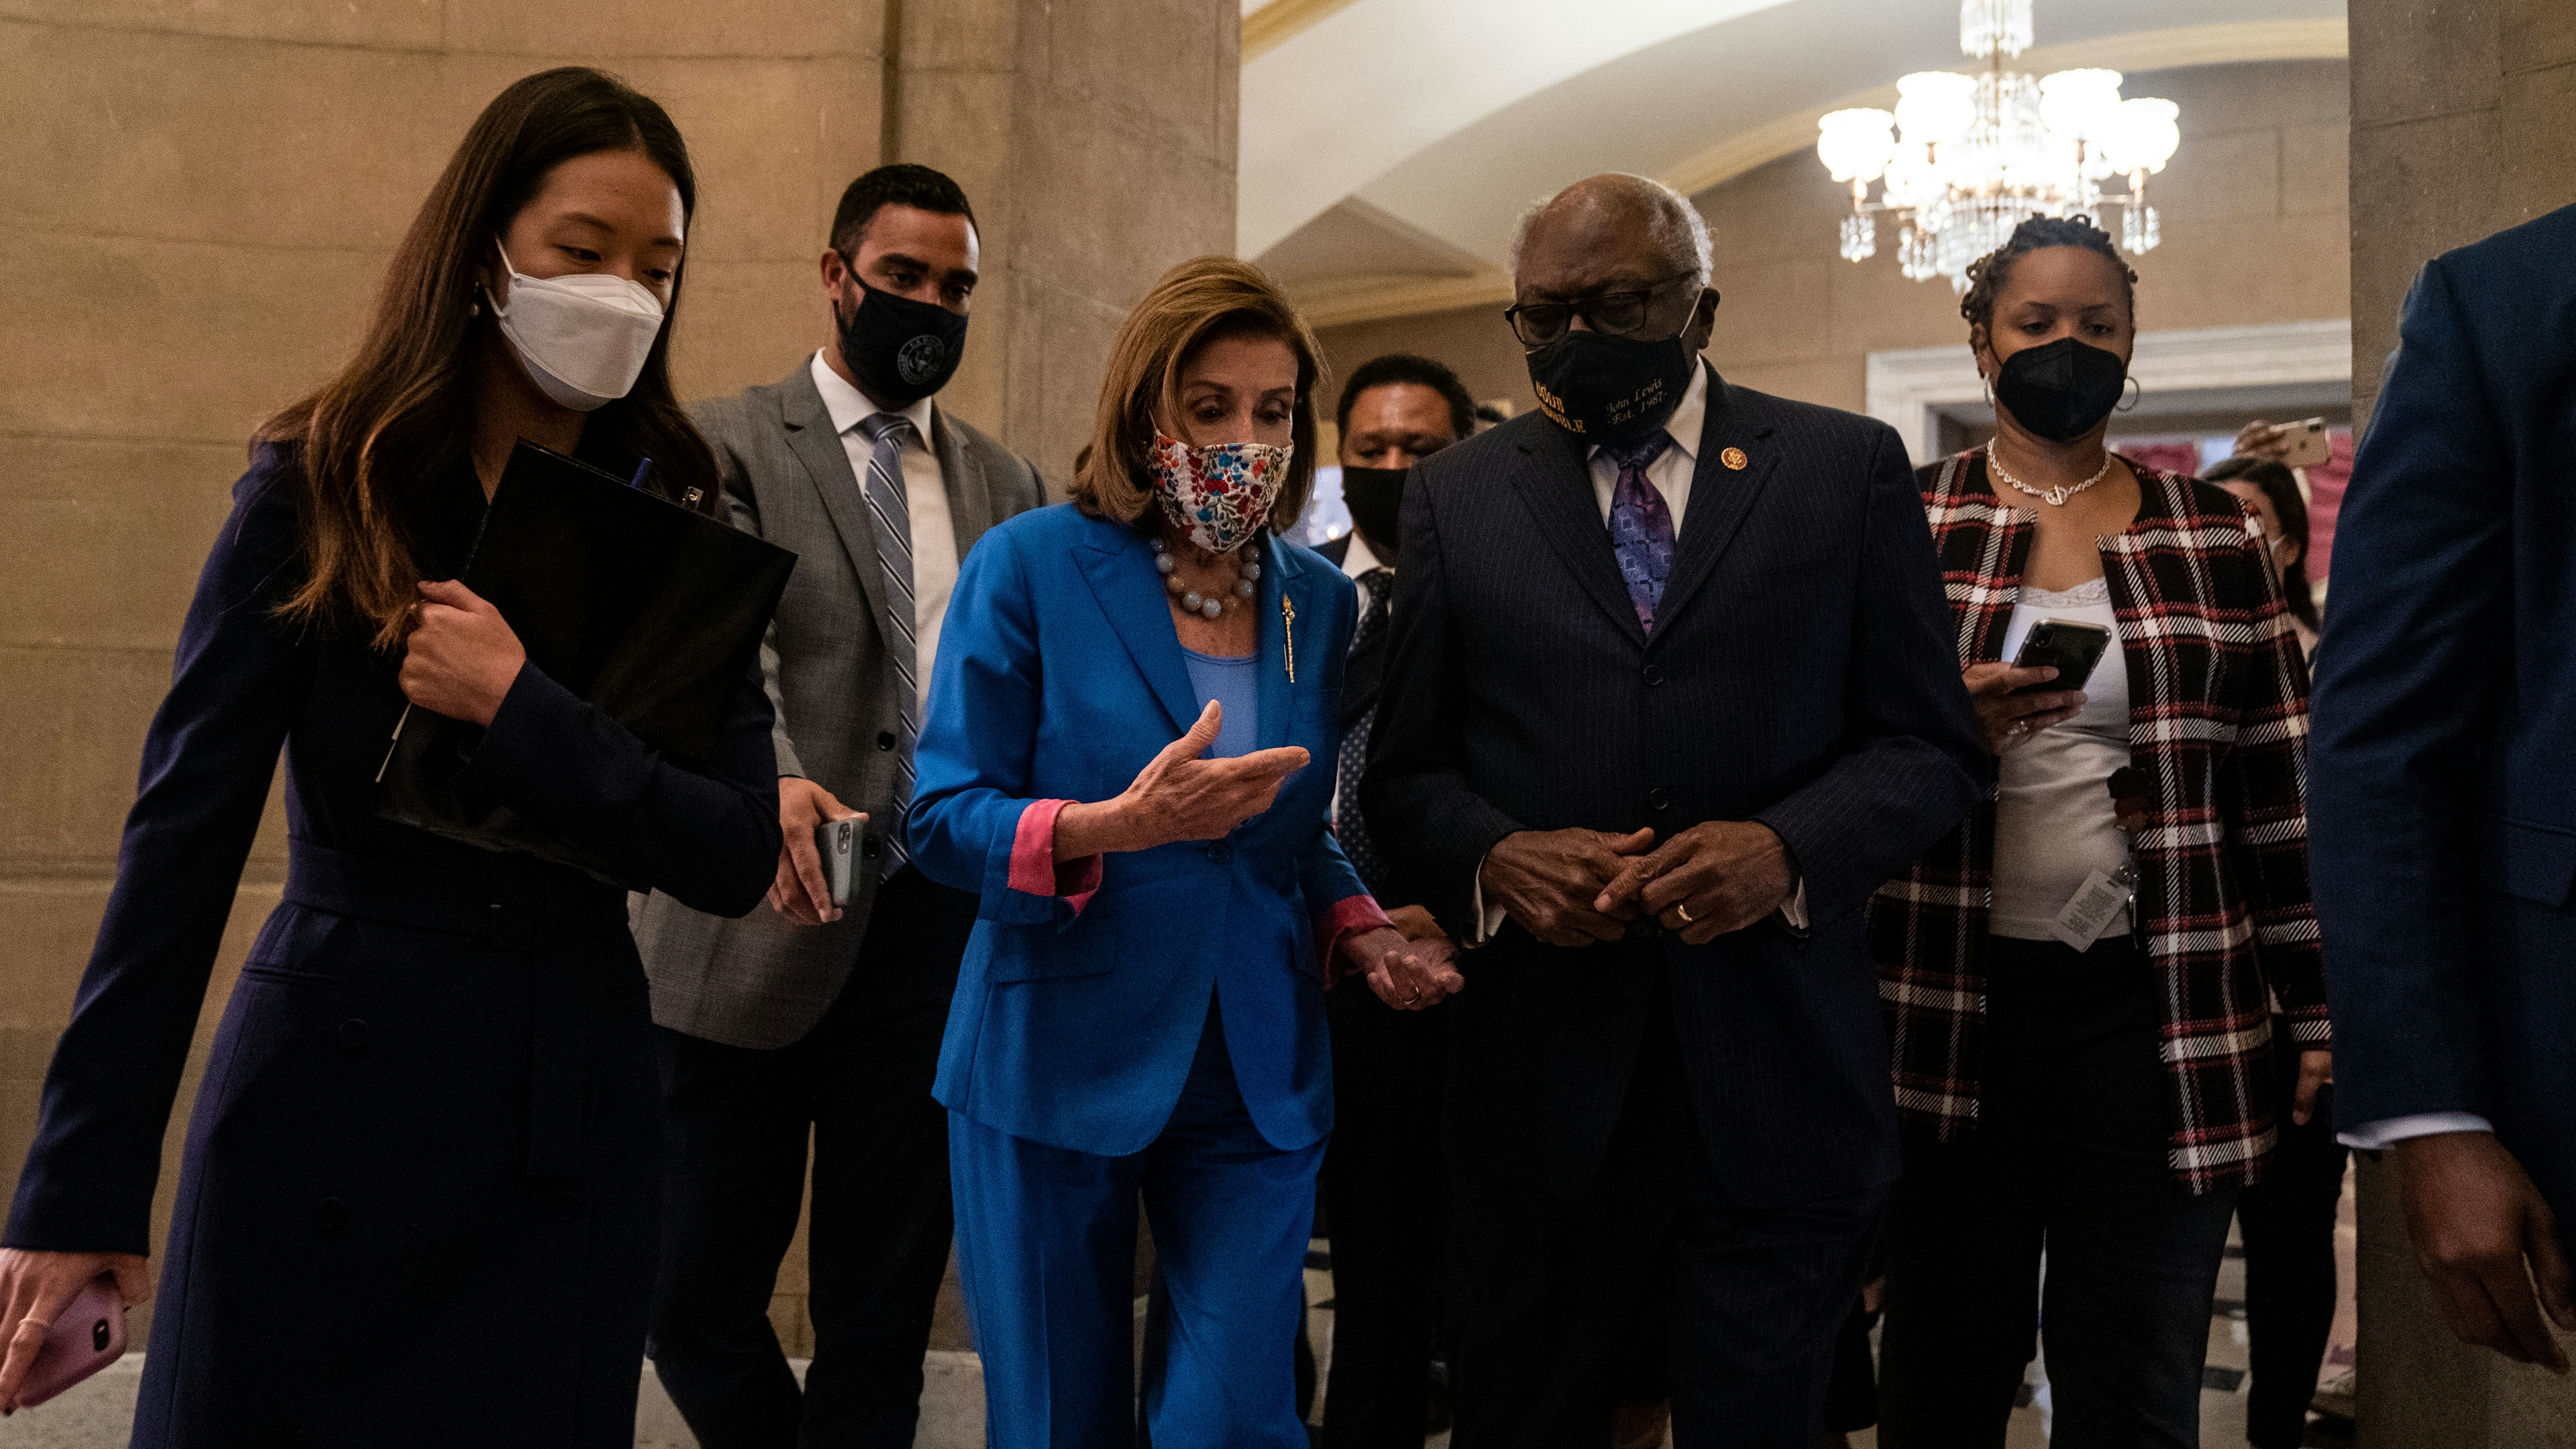 Speaker of the House Nancy Pelosi (D-CA) returns to her office, while she talks with Rep. James Clyburn